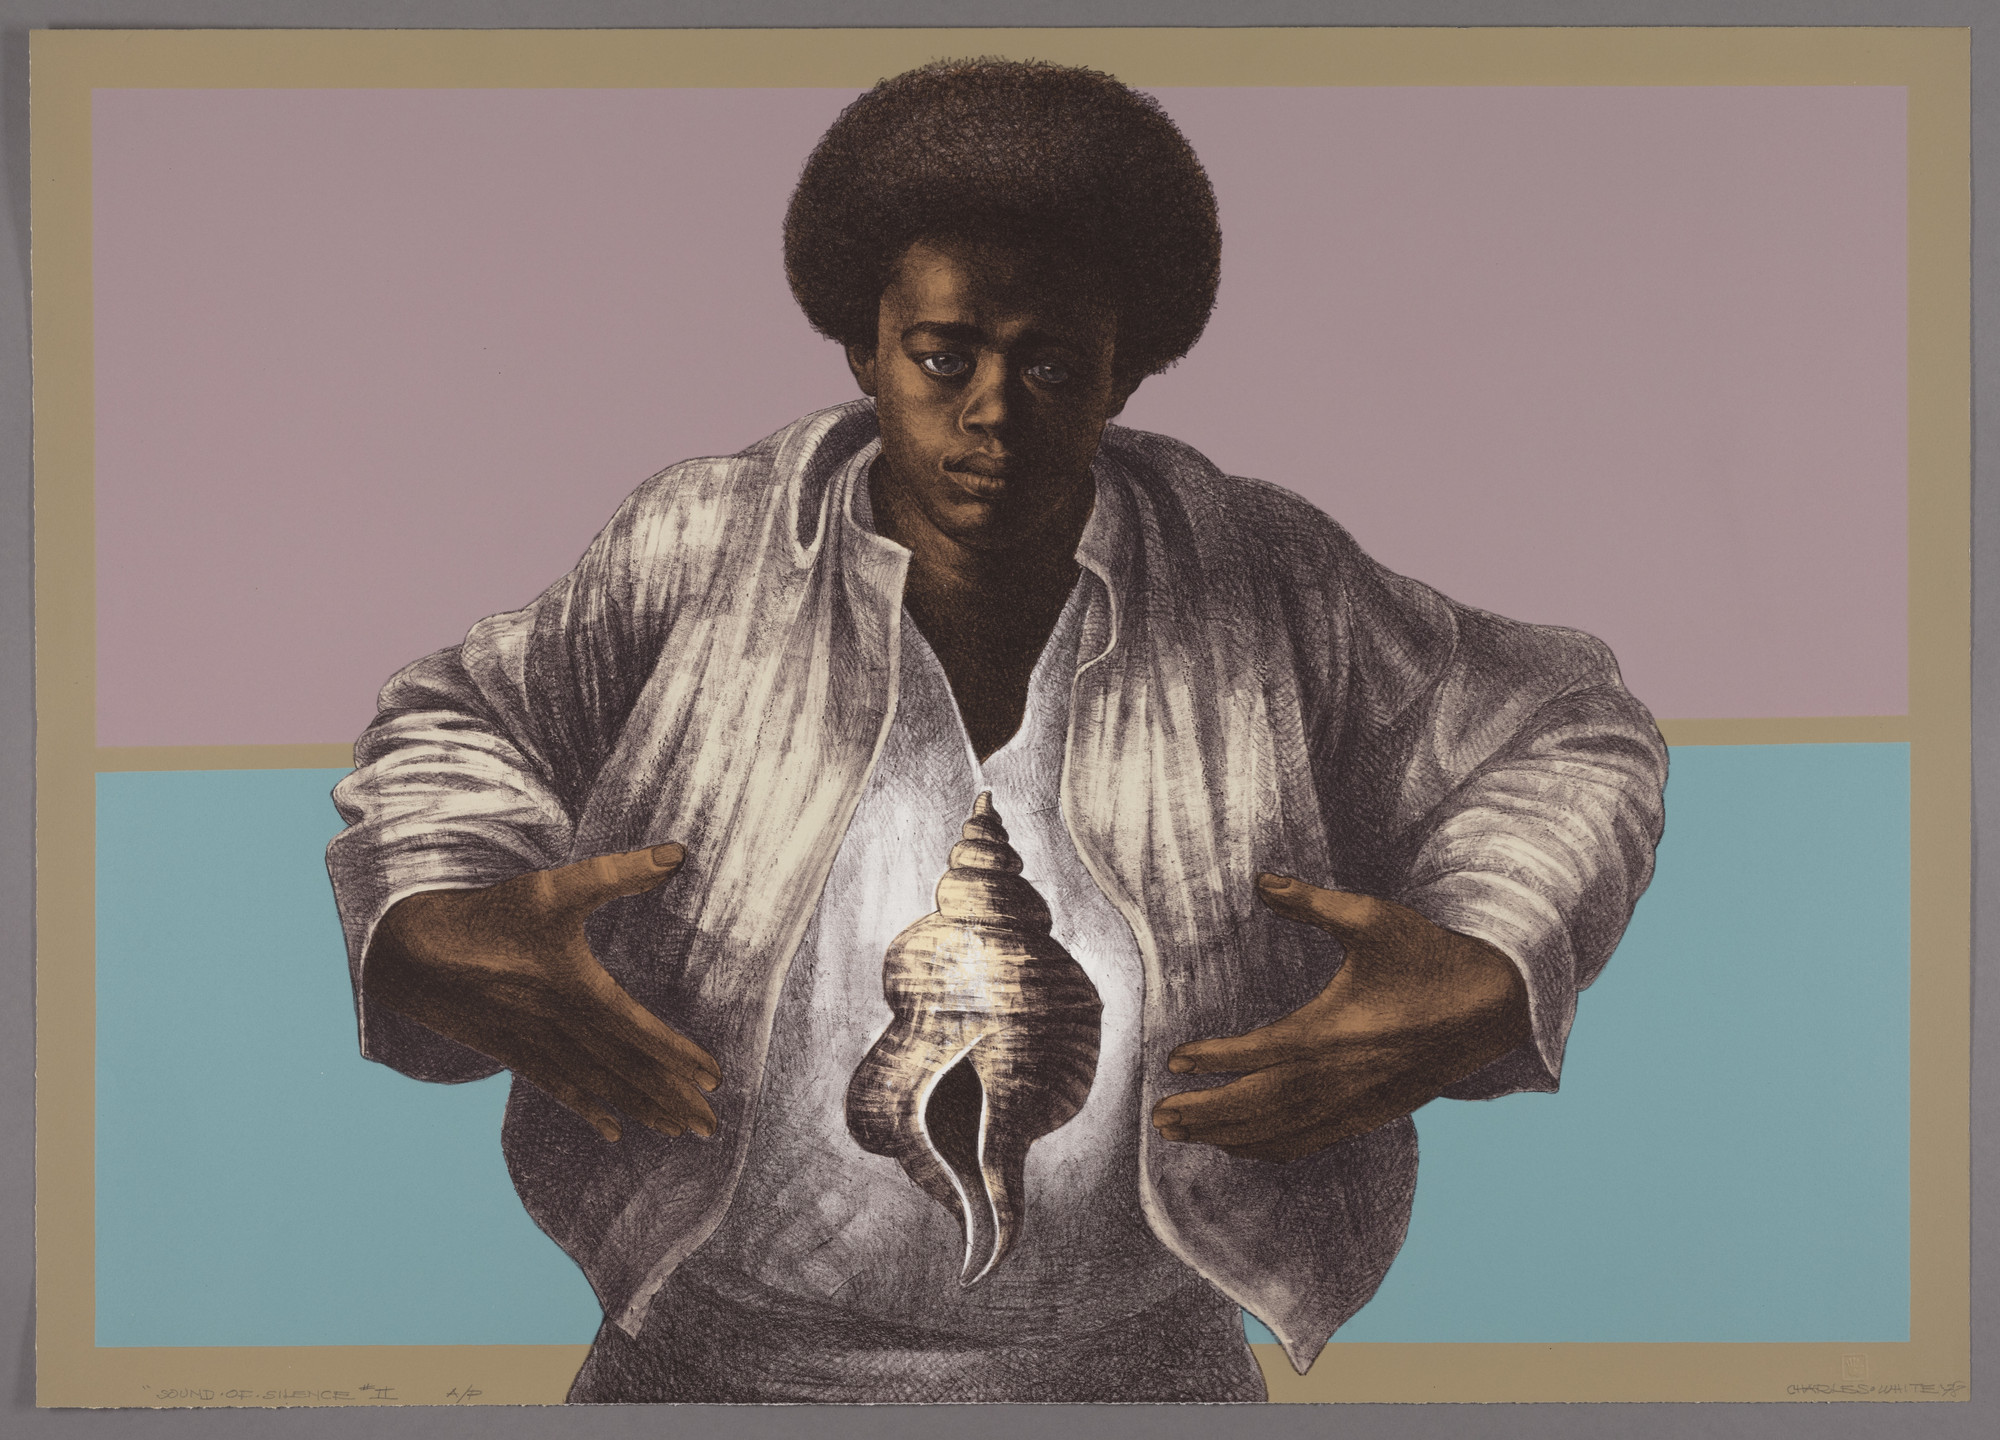 Charles White. _Sound of Silence_. 1978. Lithograph, 25 1/8 x 35 5/16" (63.8 x 89.7 cm). The Art Institute of Chicago, Margaret Fisher Fund. © The Charles White Archives/ © The Art Institute of Chicago